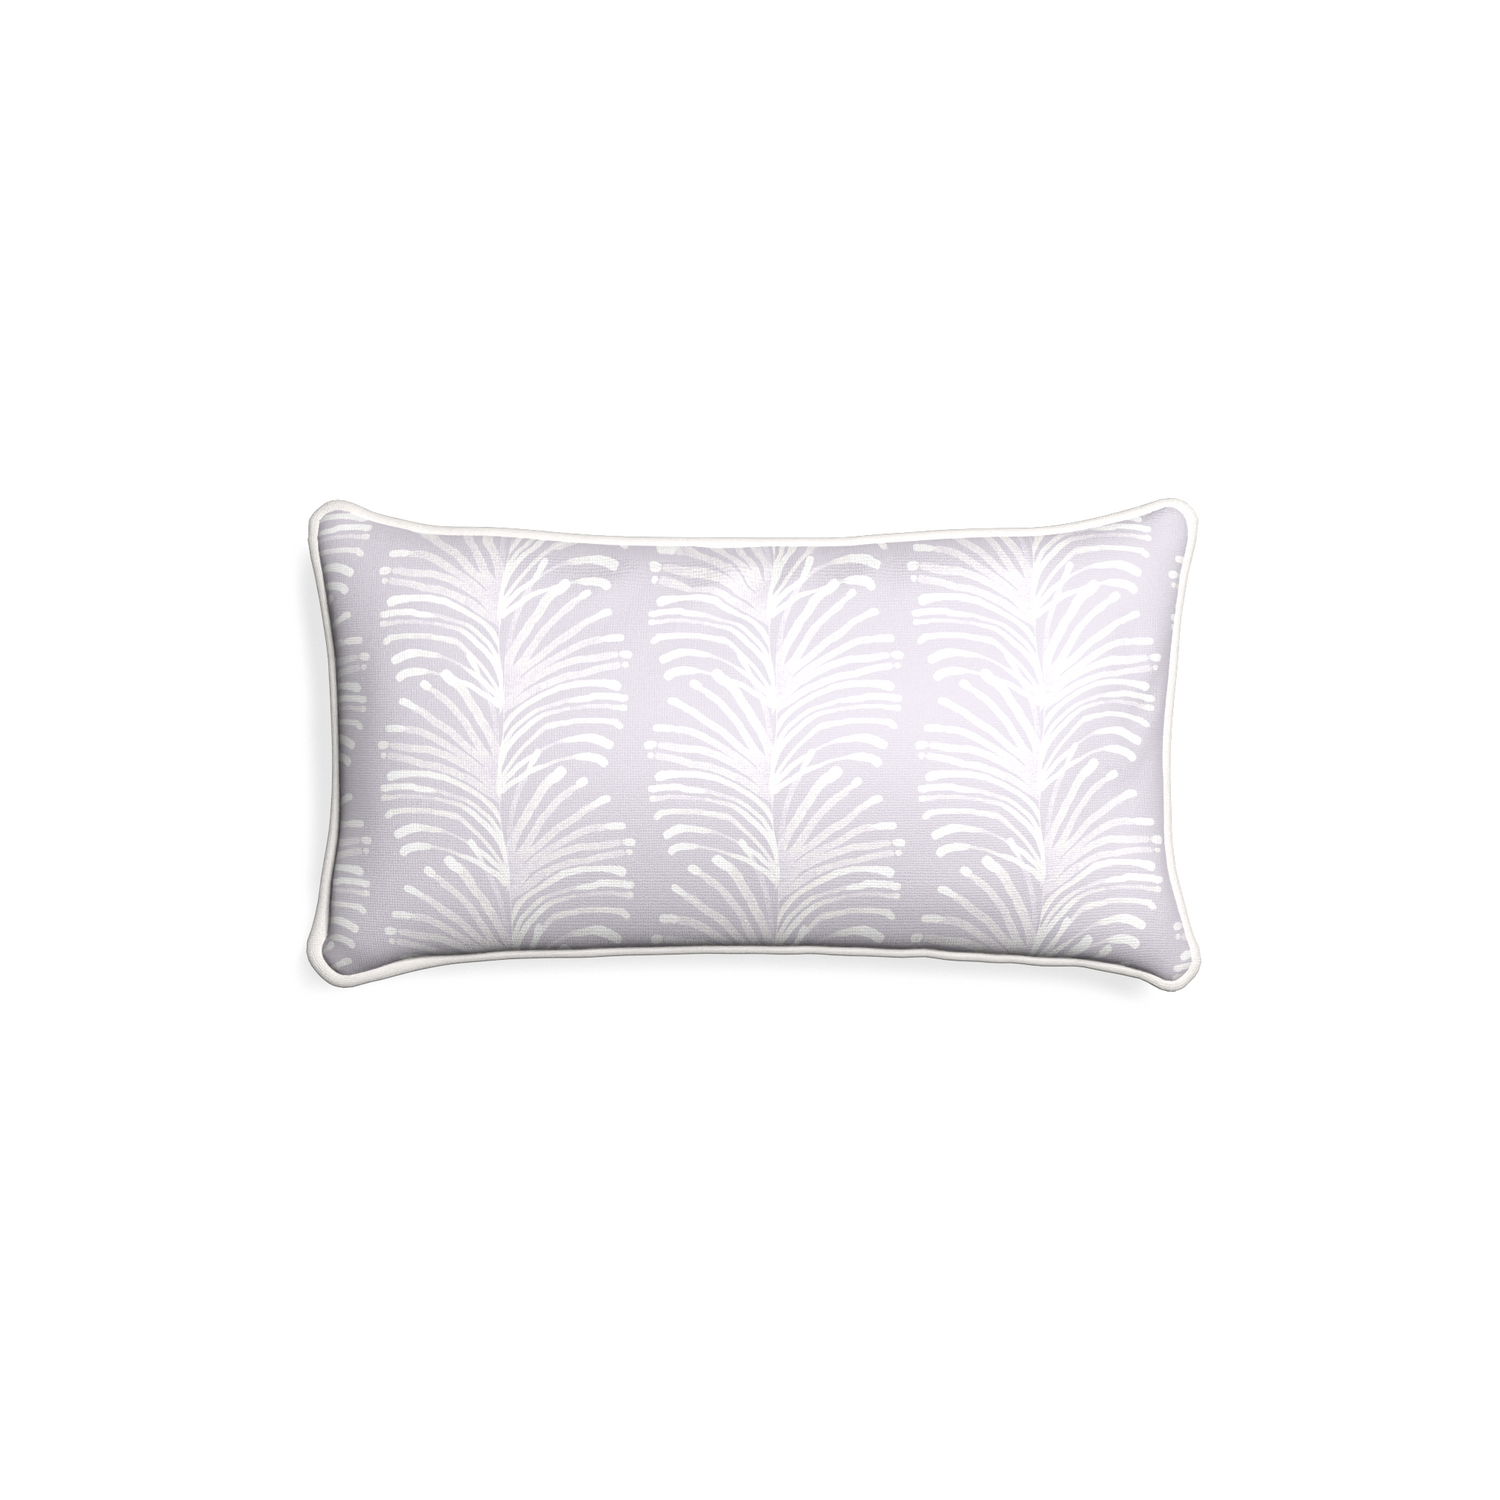 Petite-lumbar emma lavender custom lavender botanical stripepillow with snow piping on white background